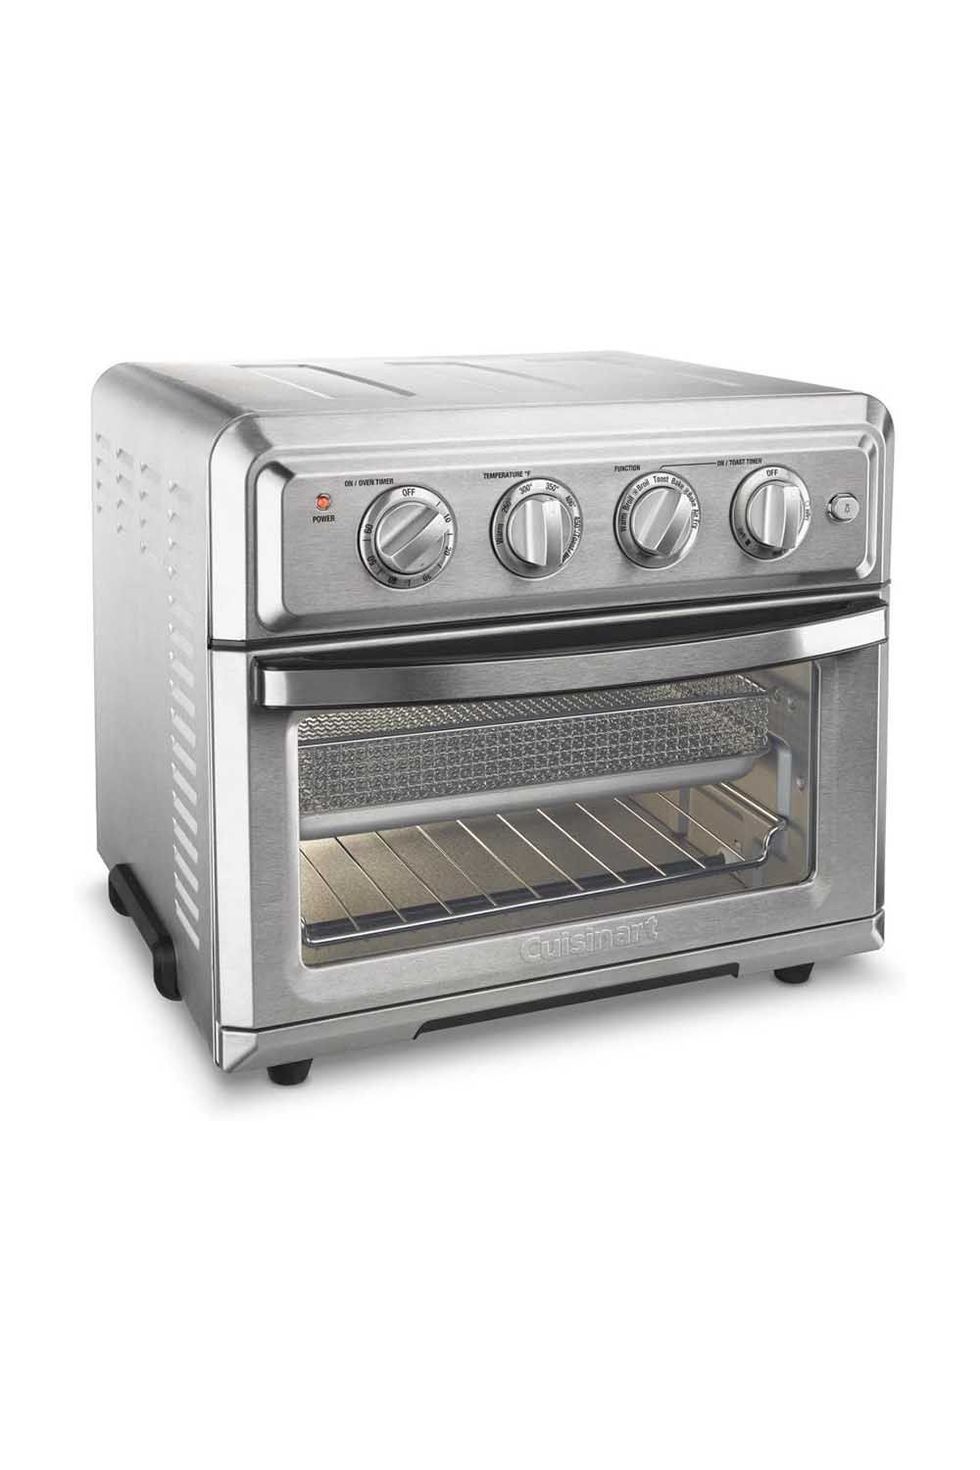 Convection Toaster Oven Airfryer